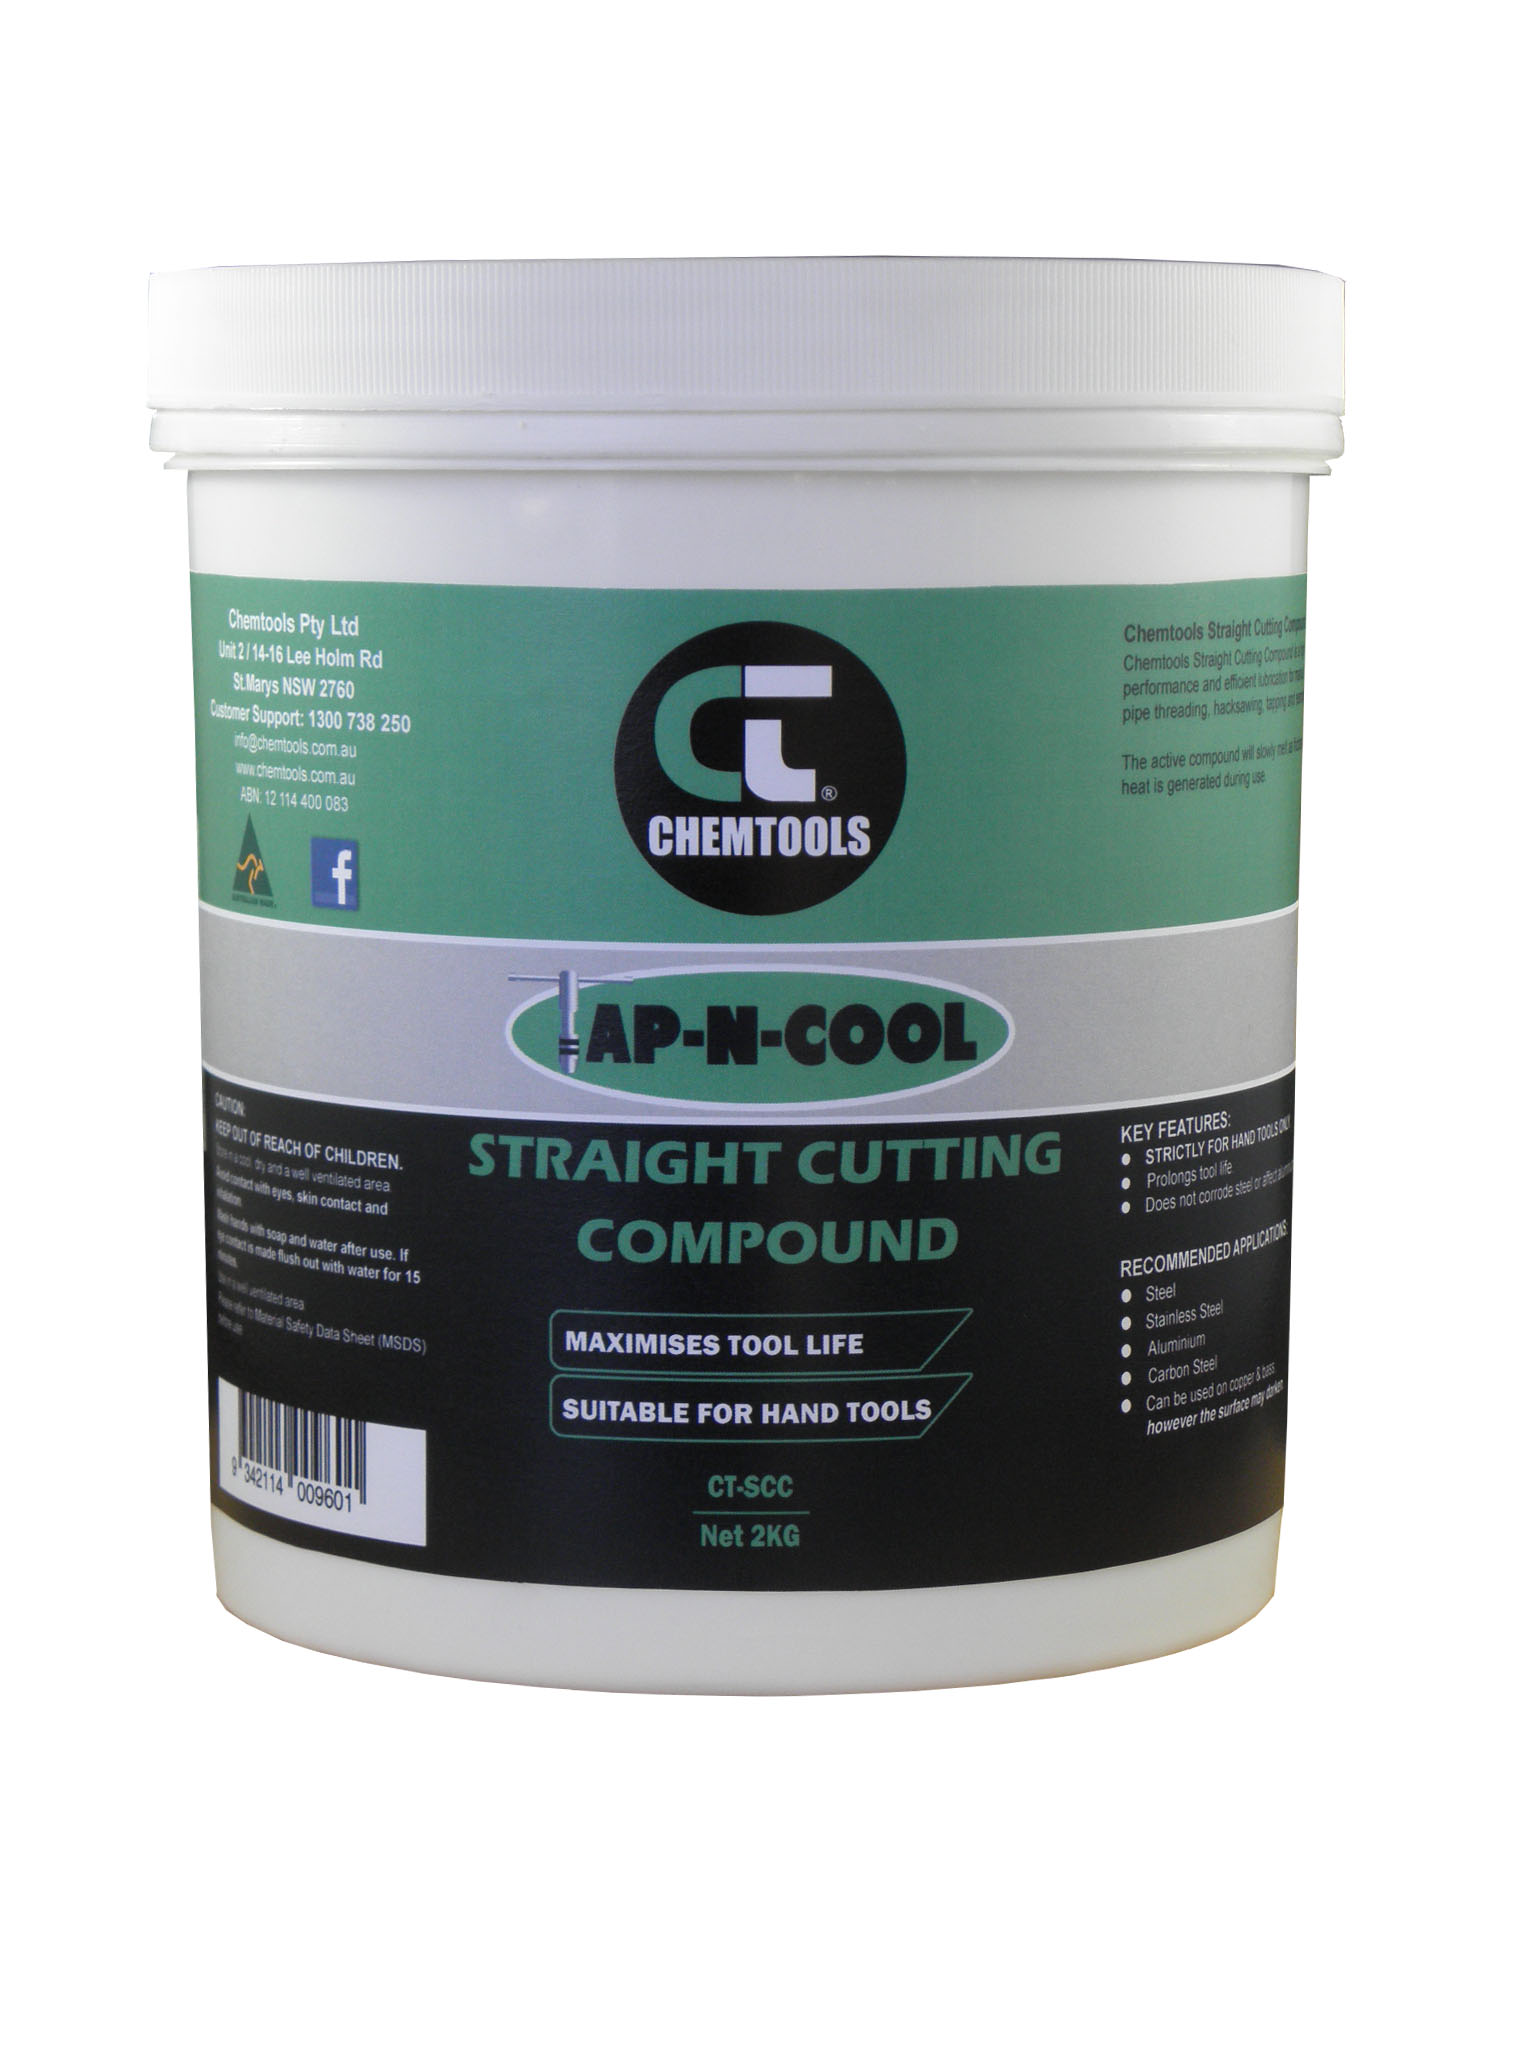 CHEMTOOLS TAP-N-COOL STRAIGHT CUTTING COMPOUND 2KG